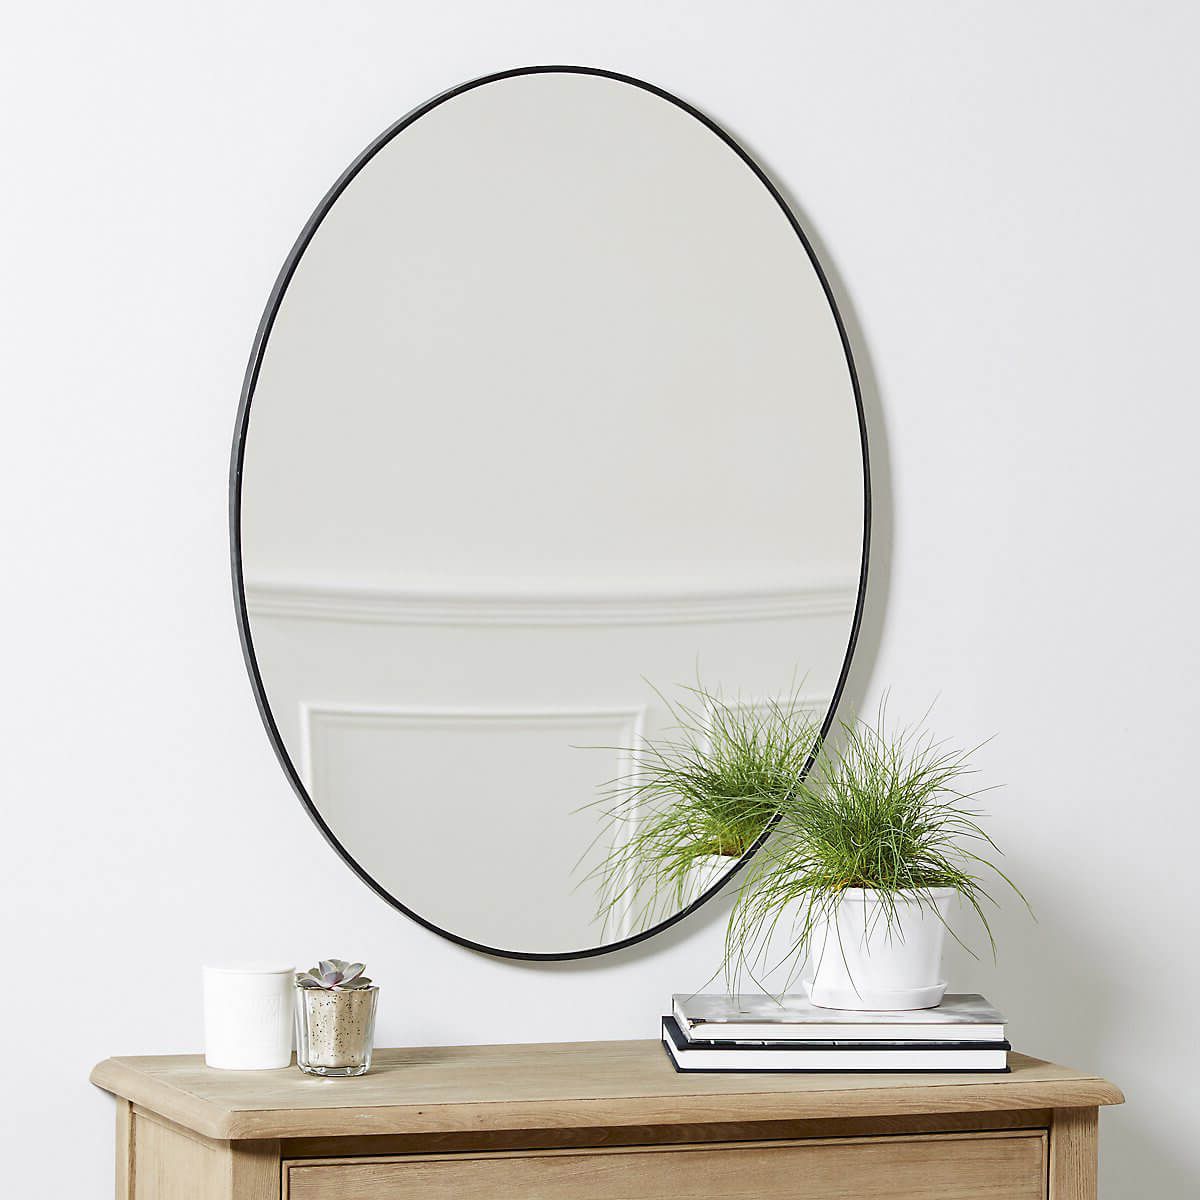 Famous Our Top Mirror Picks To Open Up Hallways – Neville Johnson Throughout Narrow Wall Mirrors (View 19 of 20)